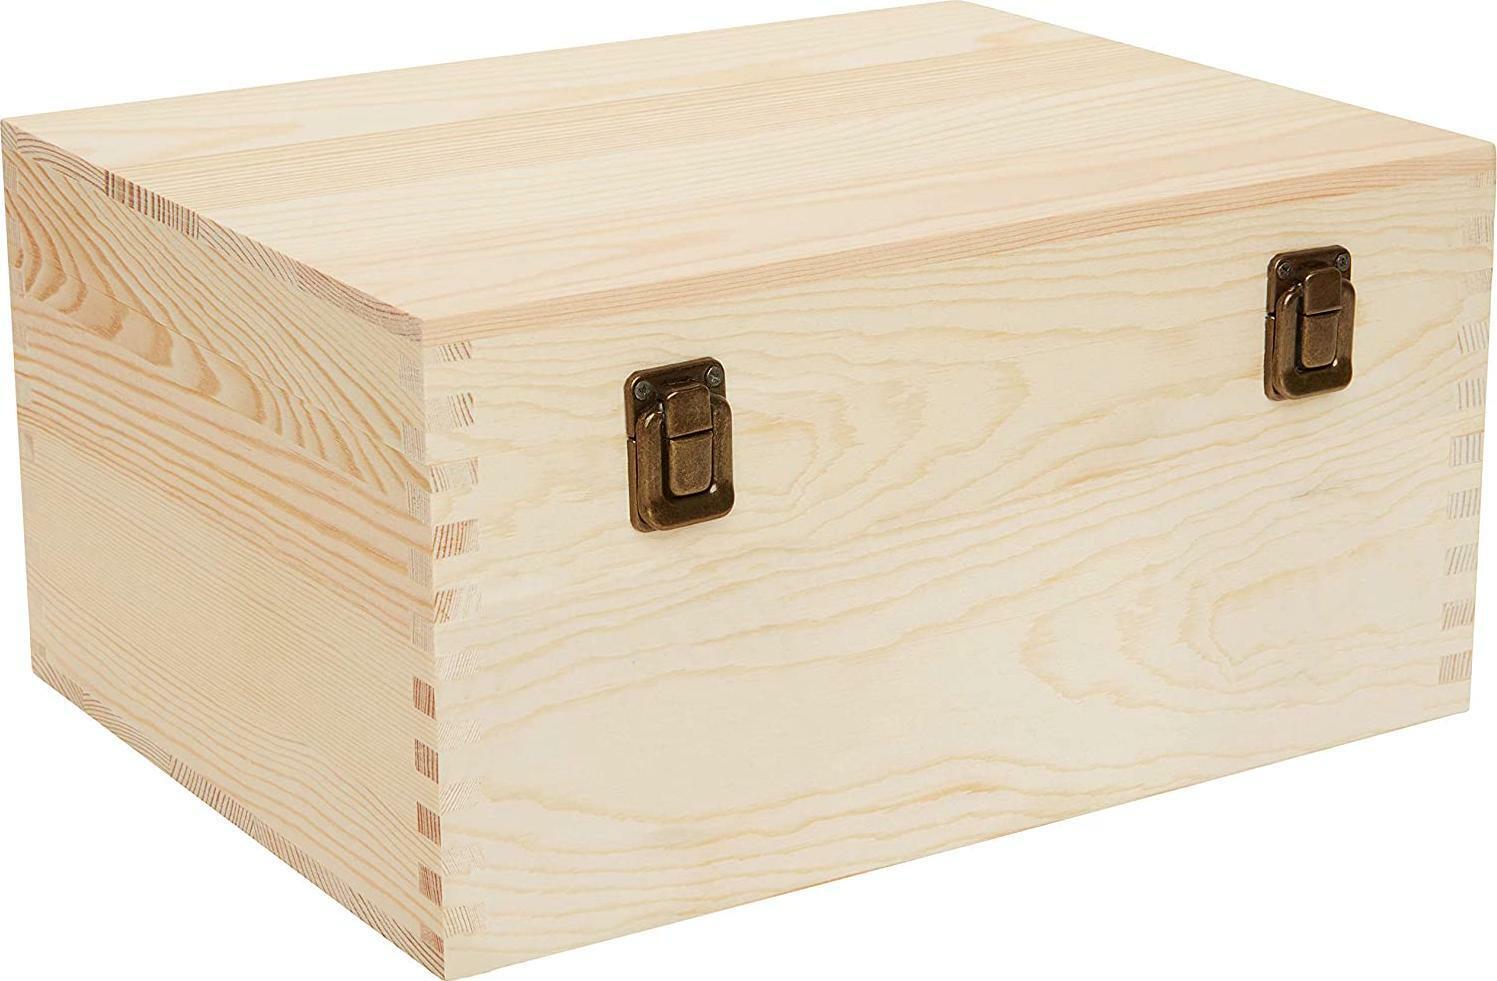  Extra Large Unfinished Pine Wood Box, 13x10x6.5 inches, Hinged Lid, 2 Clasps,